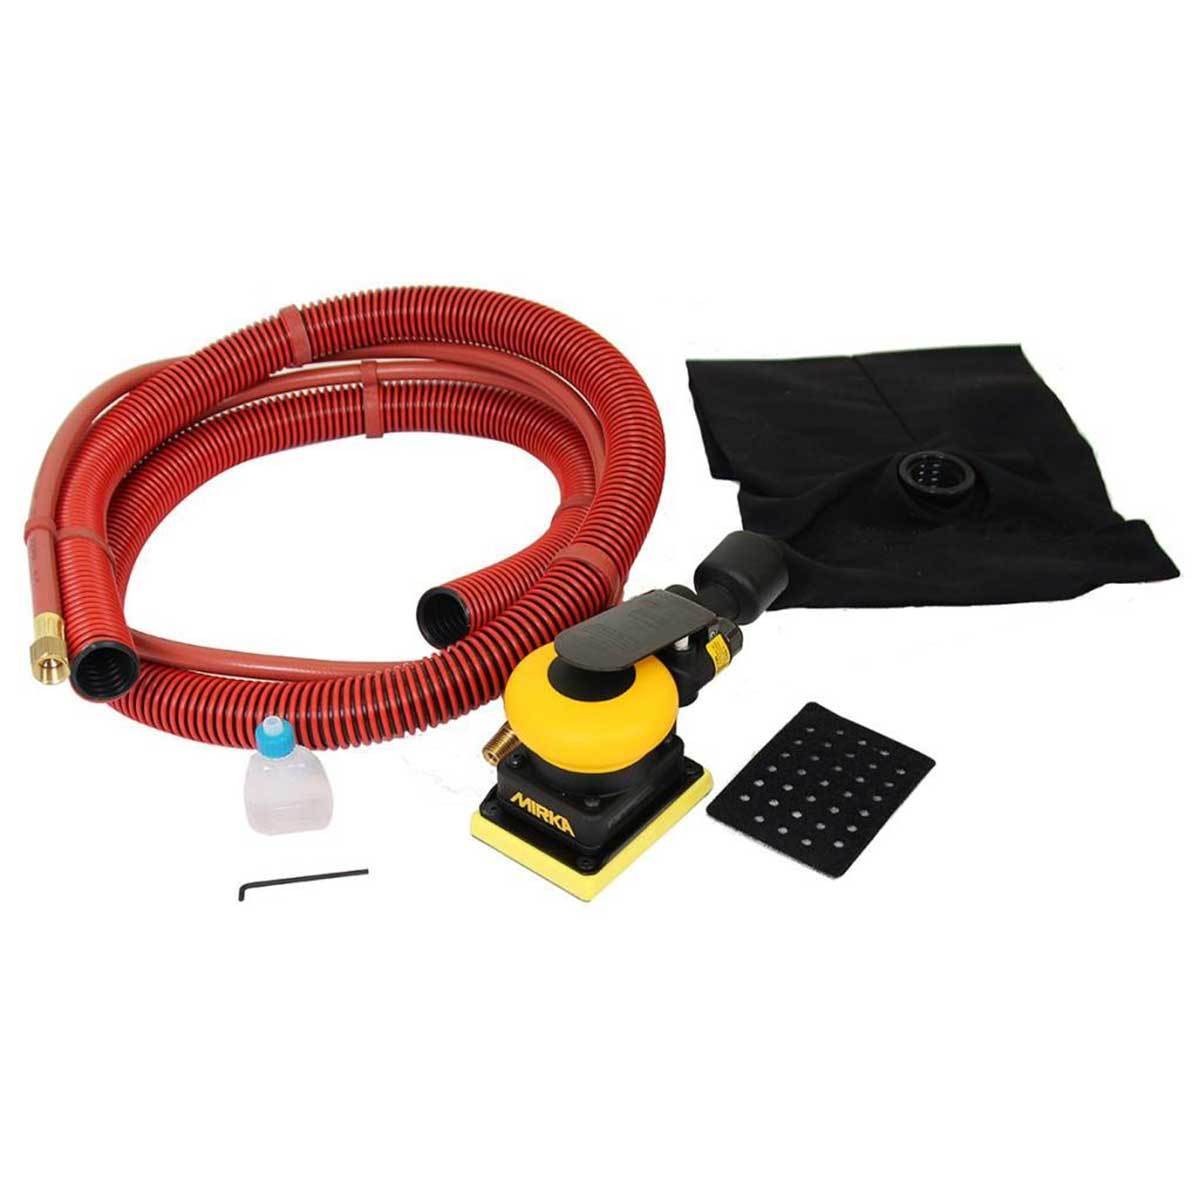 Mirka 3x4" sander includes dust extraction hose and bag, air hose, Pad saver, adapter and pneumatic tool oil.  Edit alt text